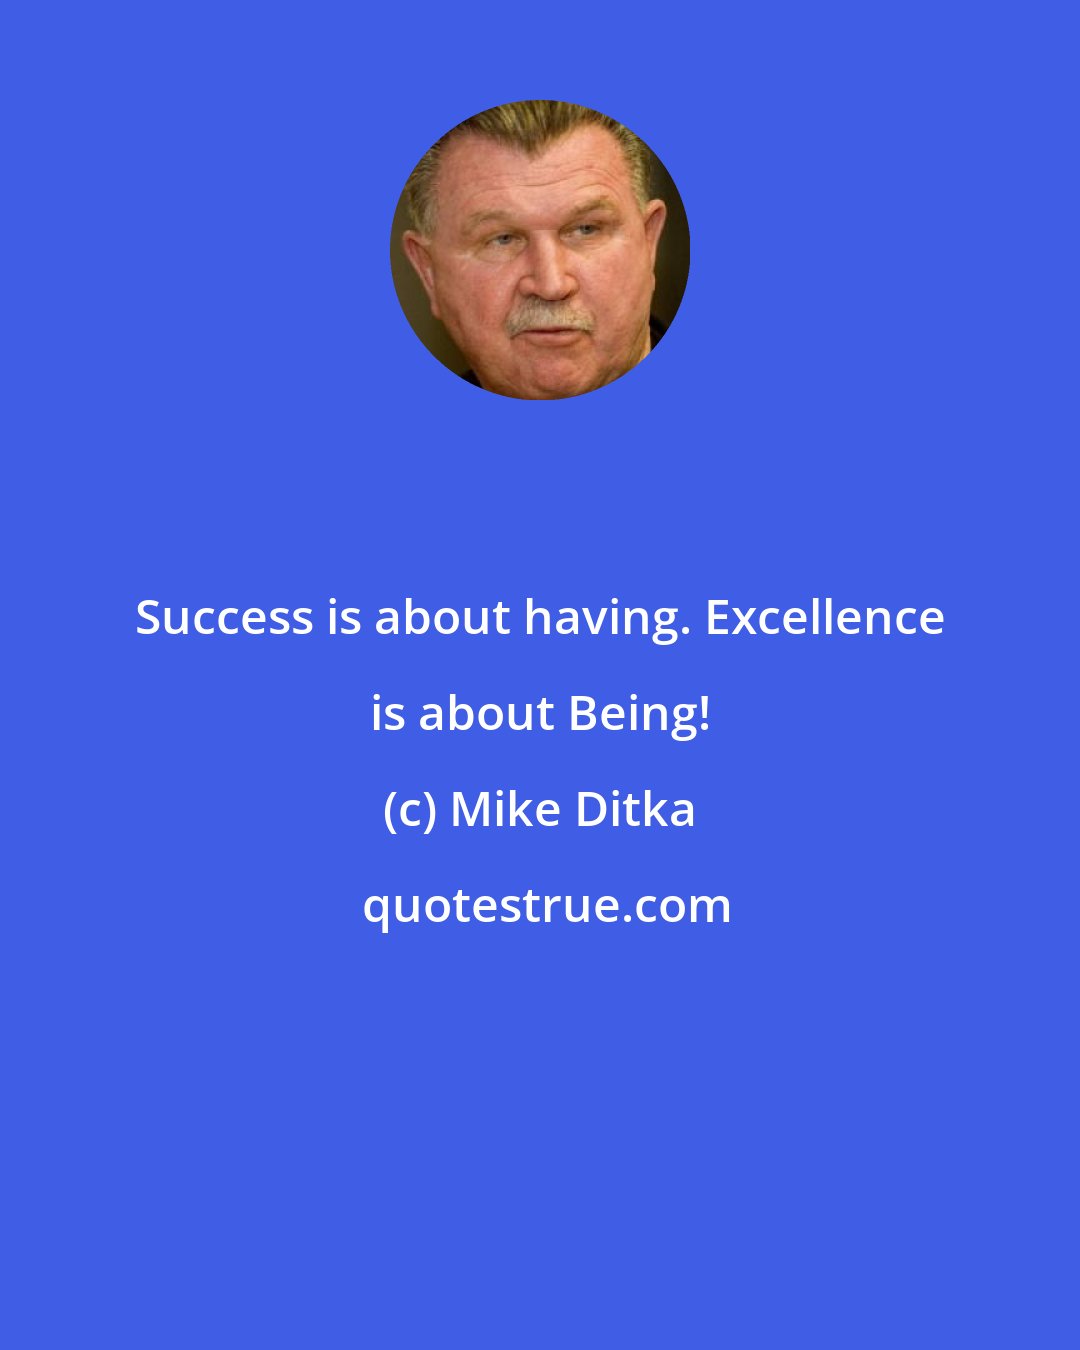 Mike Ditka: Success is about having. Excellence is about Being!